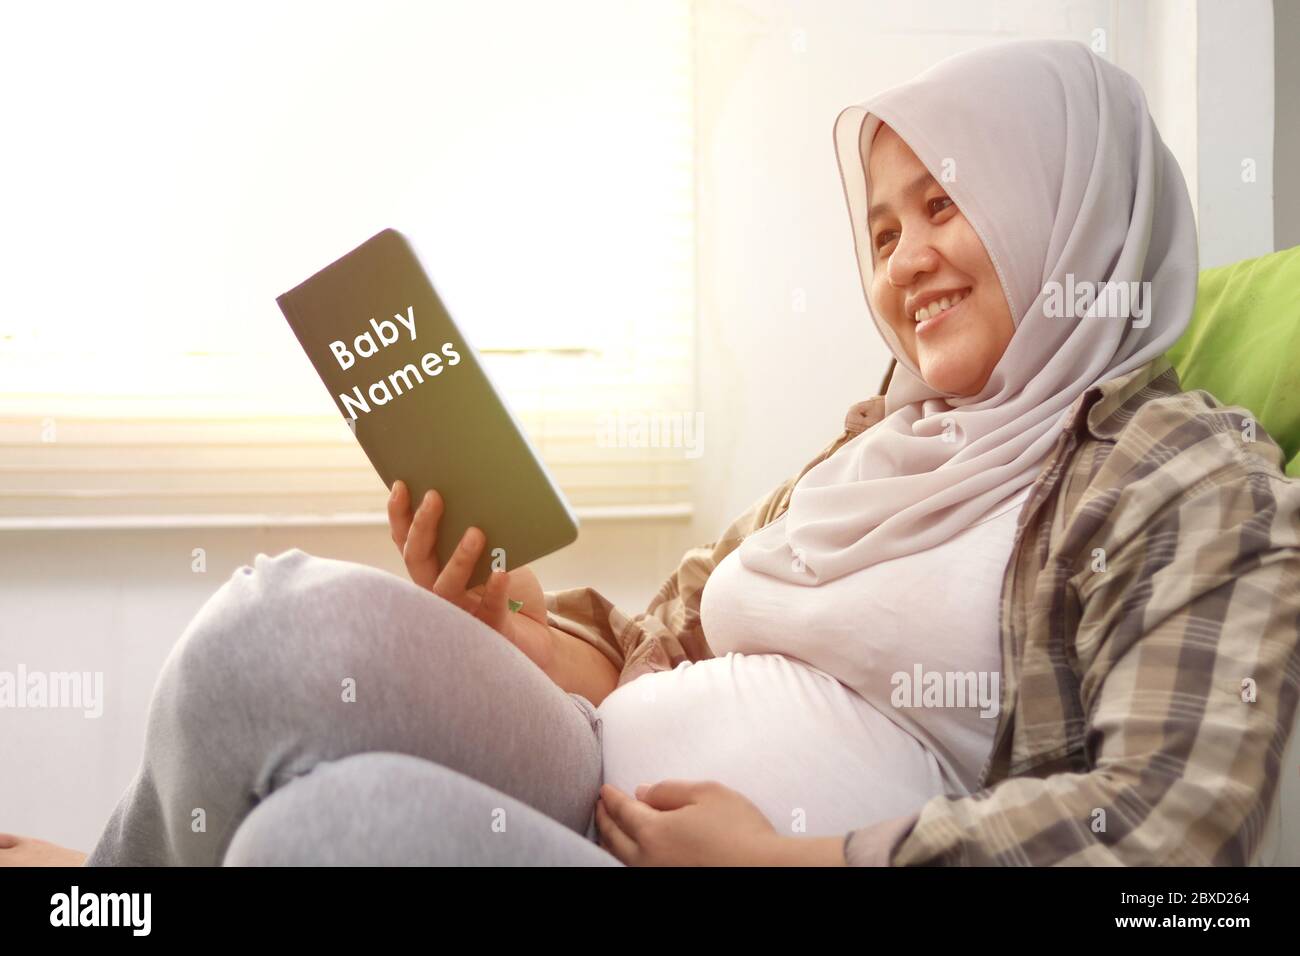 Pregnant woman sitting on couch her belly and reading baby name book. Expecting mother relaxing and smiling, preparing name for her baby Stock Photo